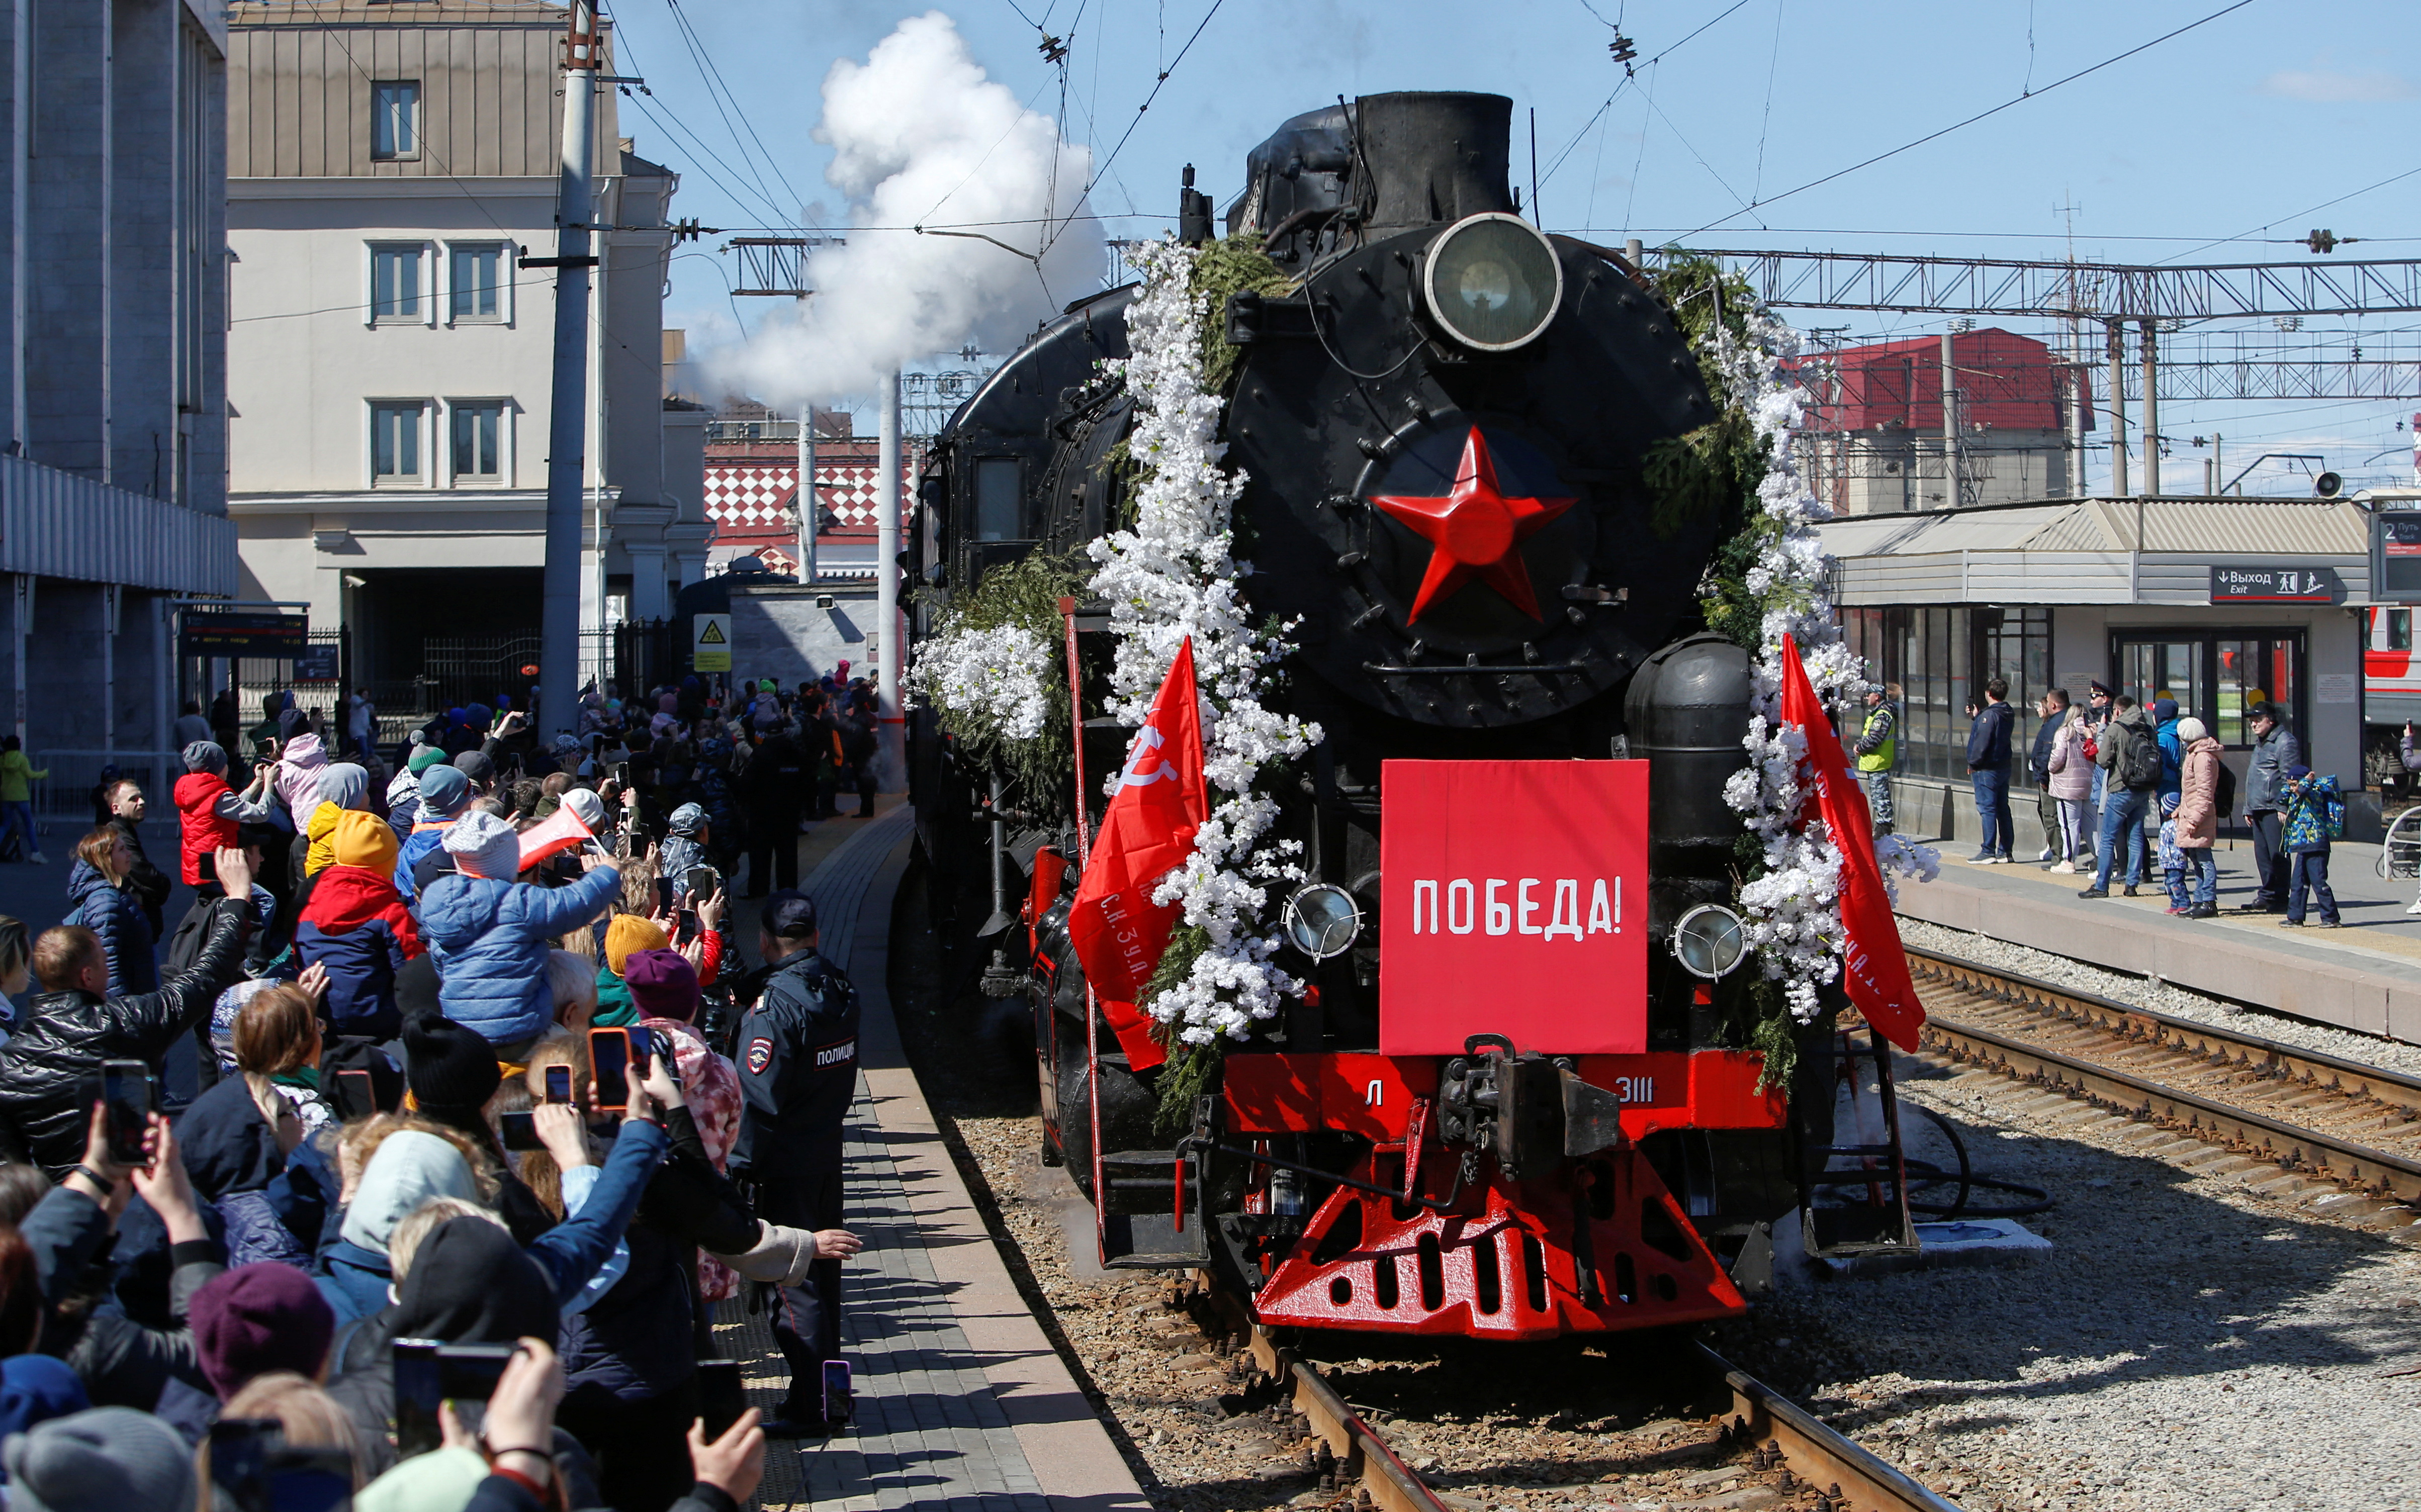 A Soviet-era train arrives at a railway station ahead of Victory Day in Yekaterinburg